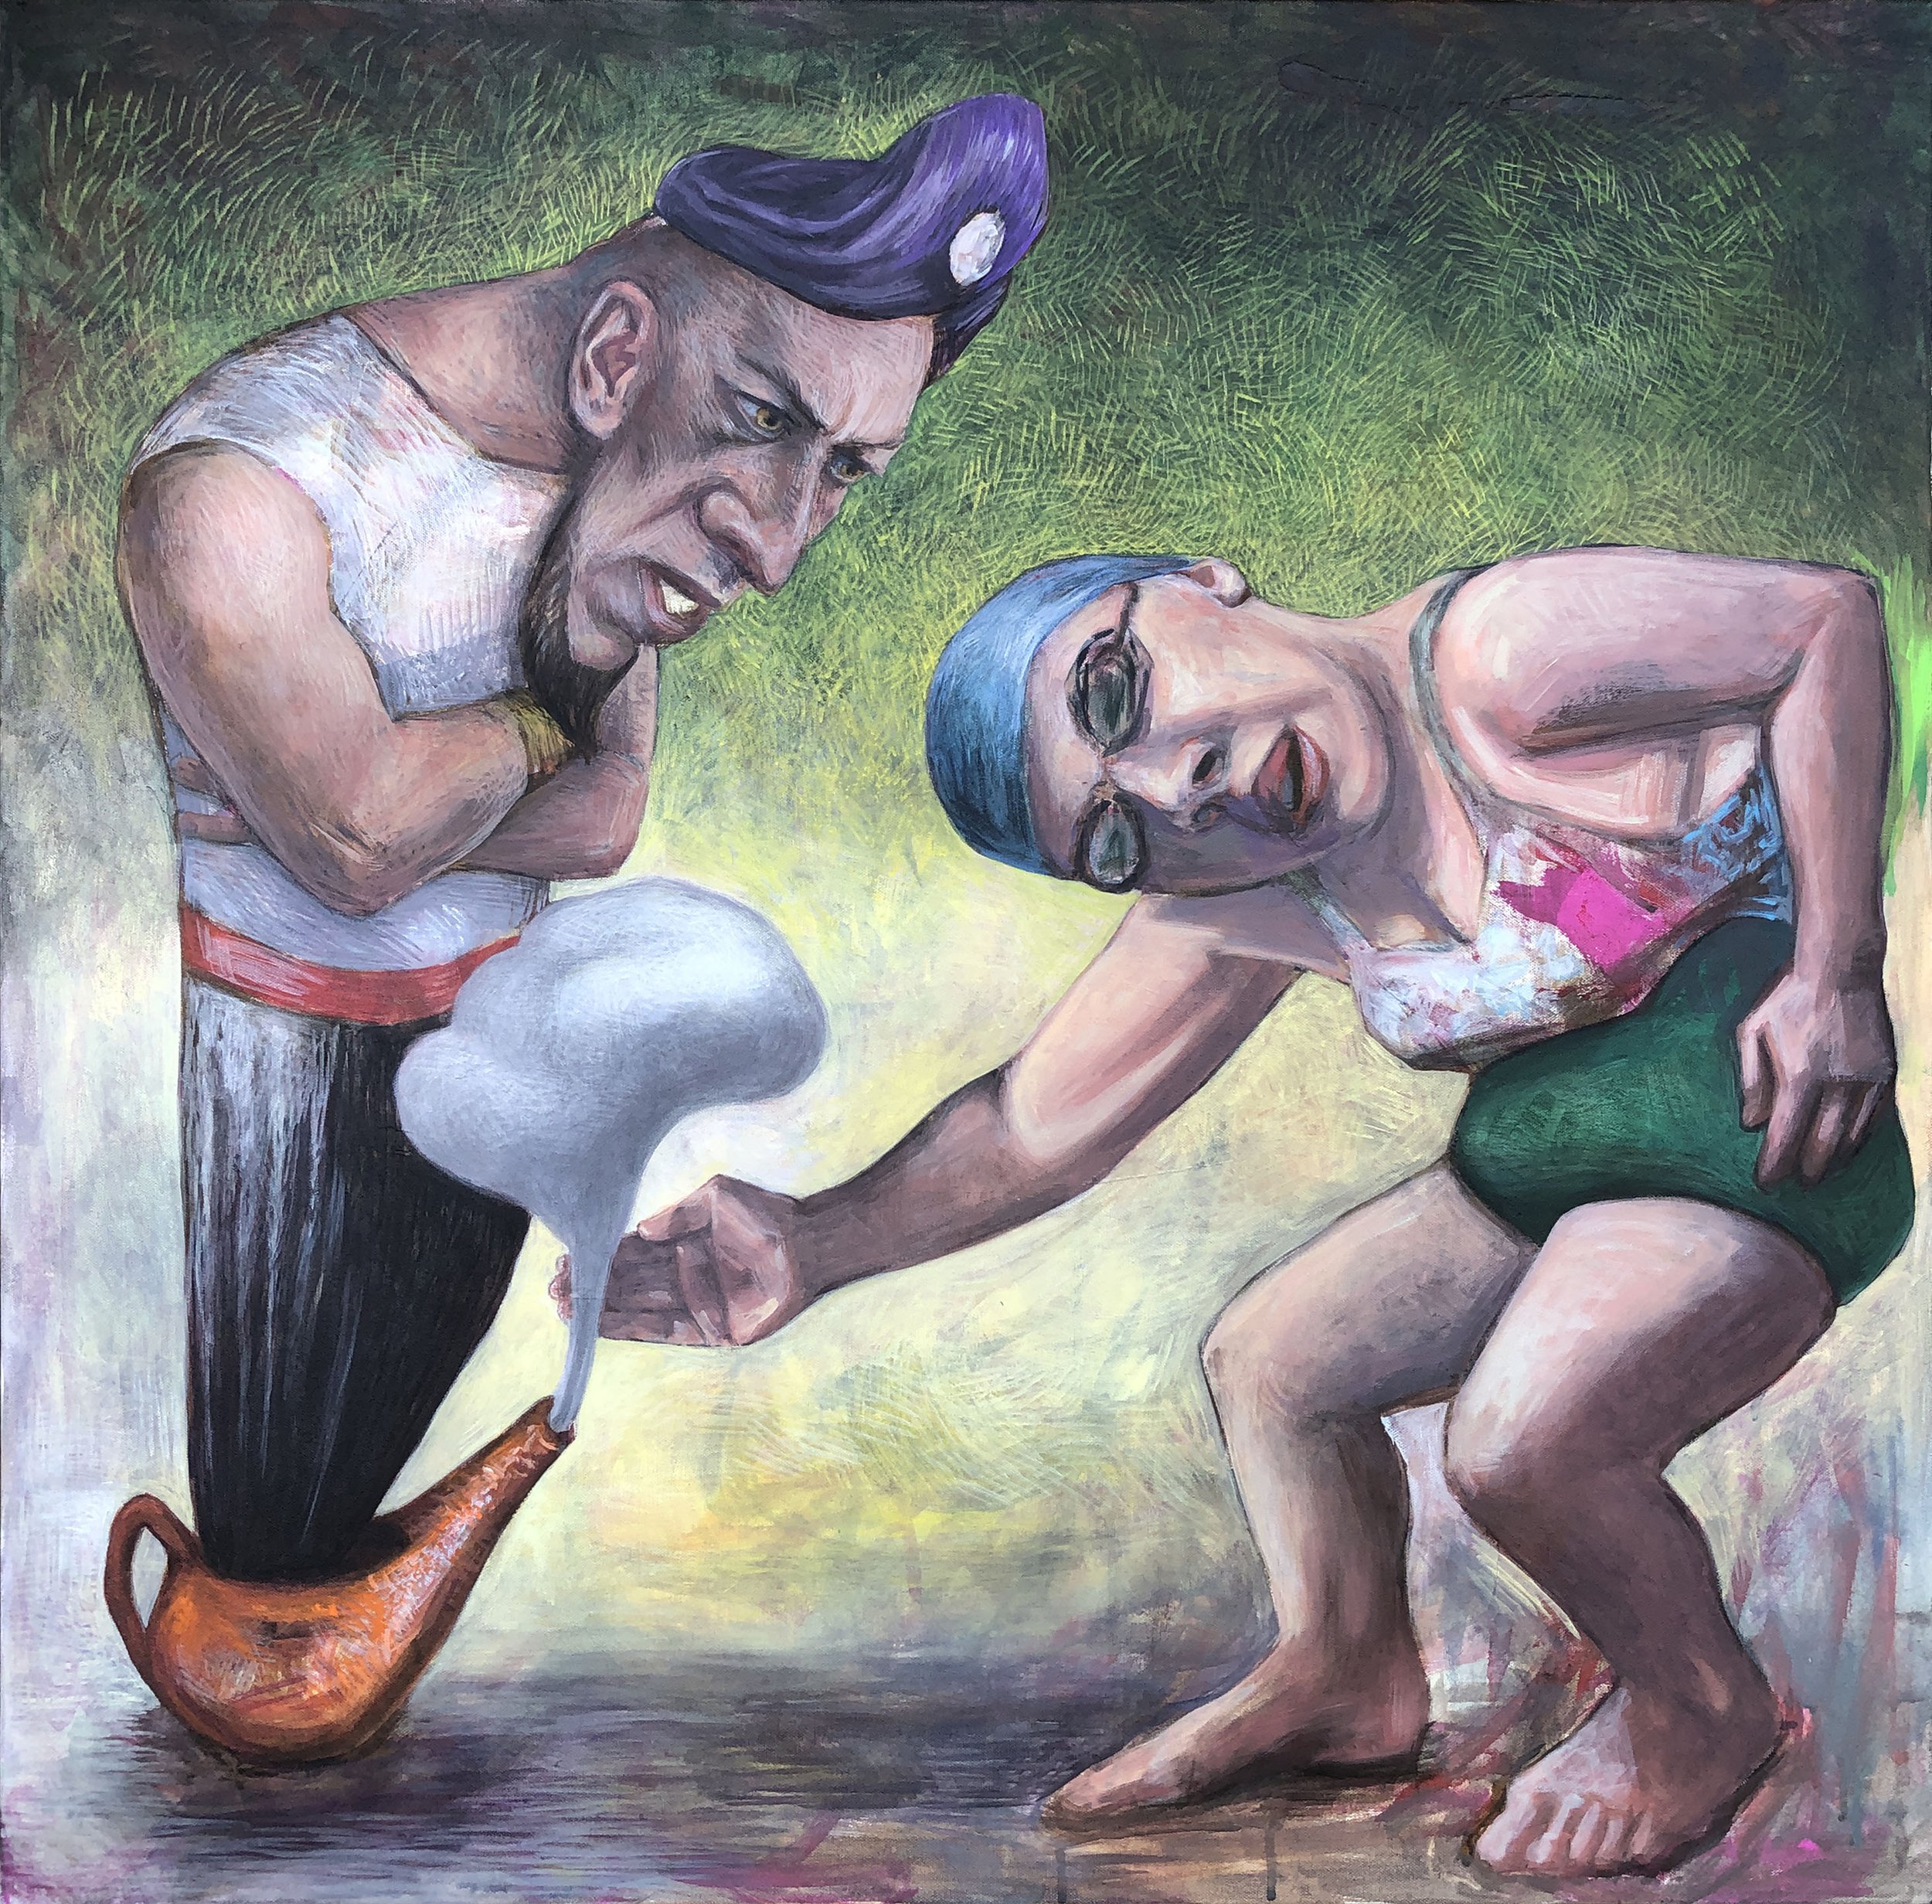 "Genie and the Swimmer" 2021 Acrylic on Canvas 40" x 40"